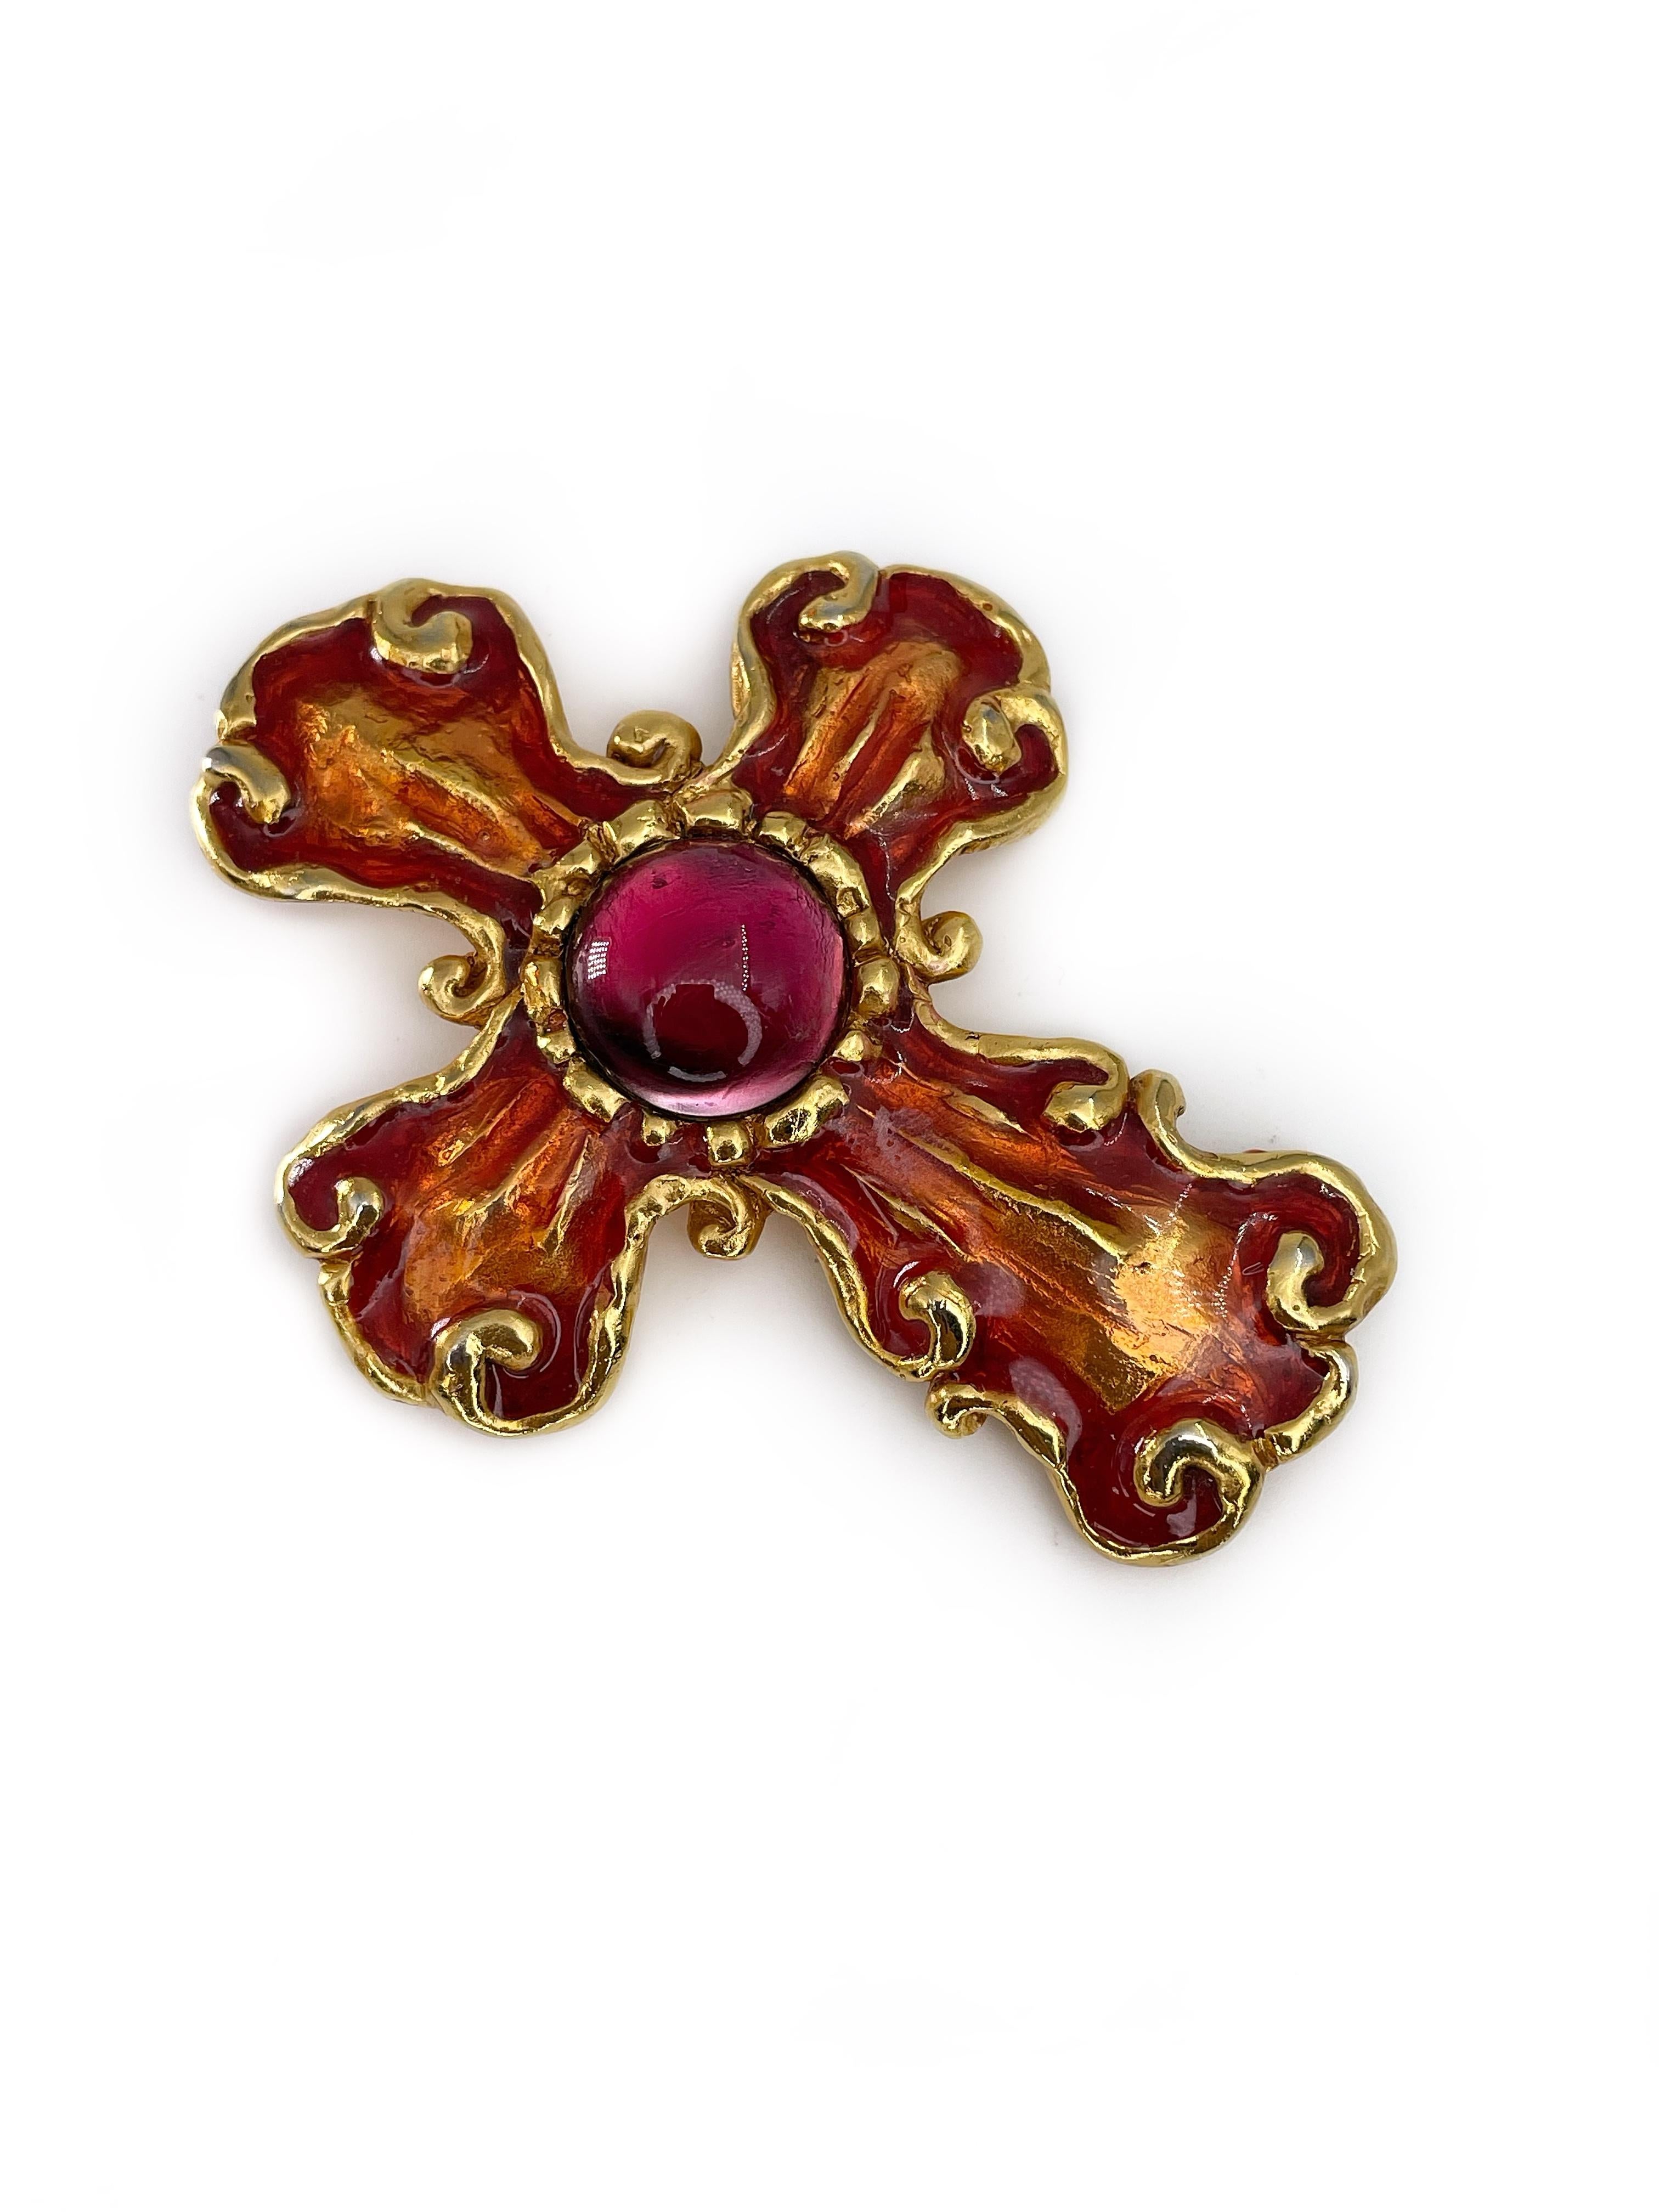 This is a magnificent gold tone Baroque cross brooch pendant designed by Christian Lacroix in 1990’s. The piece is gold plated, adorned with orange enamel and cabochon cut red glass at the center. 

Signed: “Christian Lacroix - CL - Made in